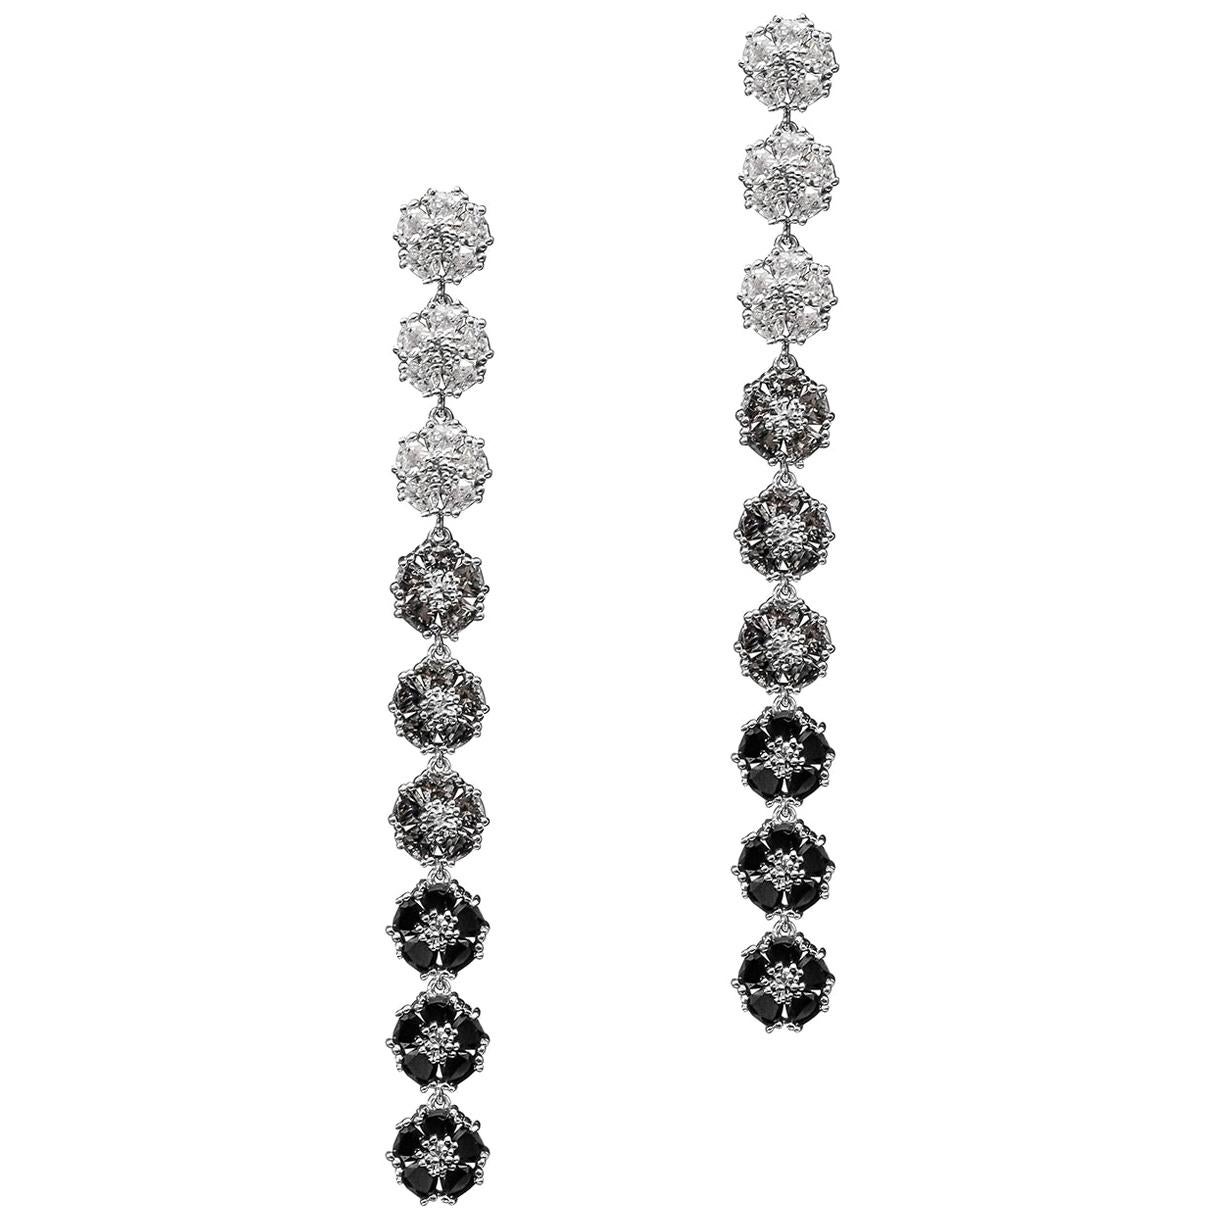 Blossom Gentile Ombre Chandelier Earrings, White, Gray and Black Gemstones For Sale